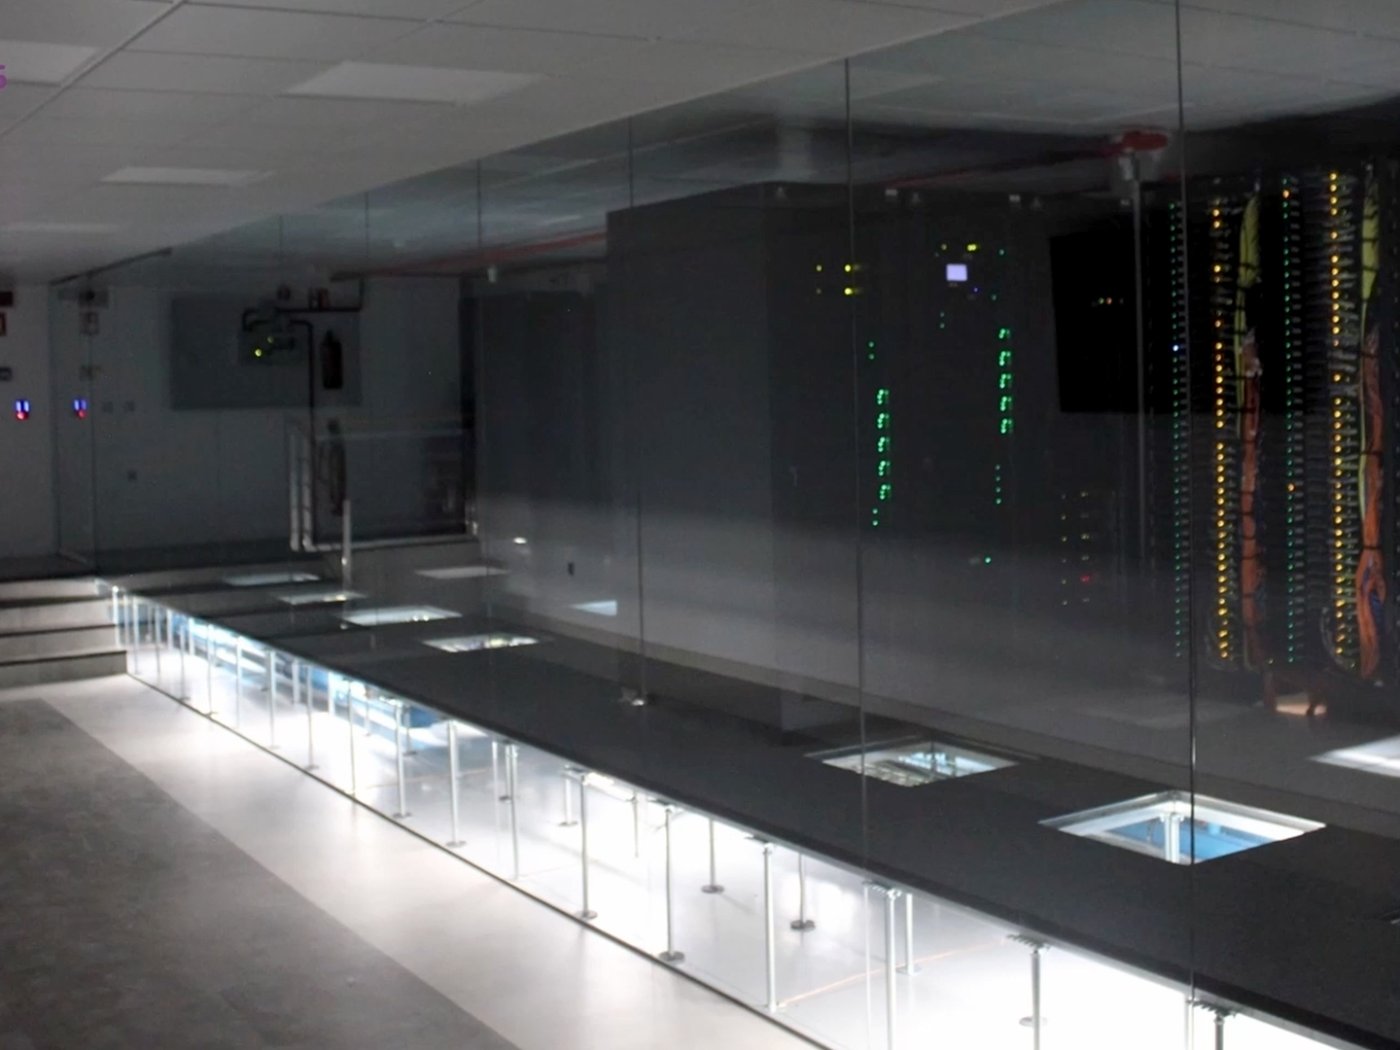 A data center designed to support data-intensive research to boost industrial development and sustainability